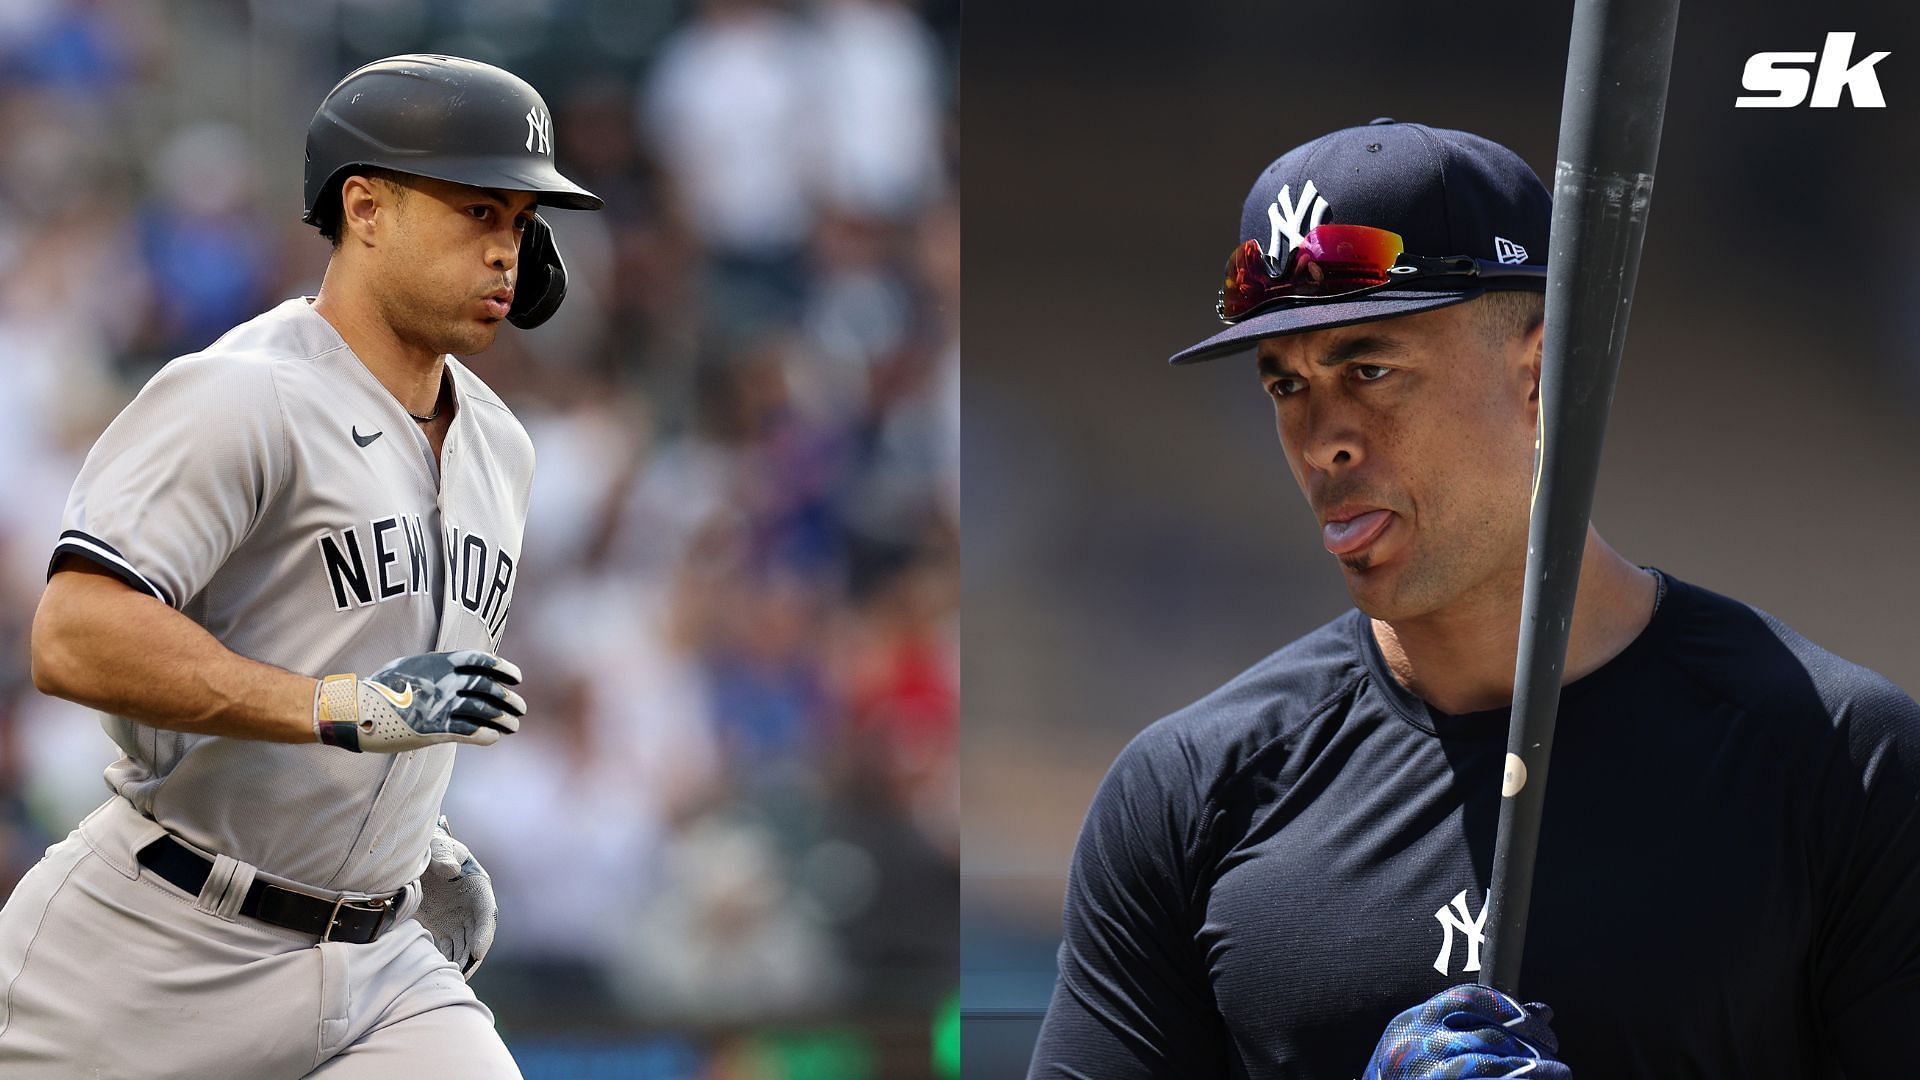 Giancarlo Stanton has settled into his role